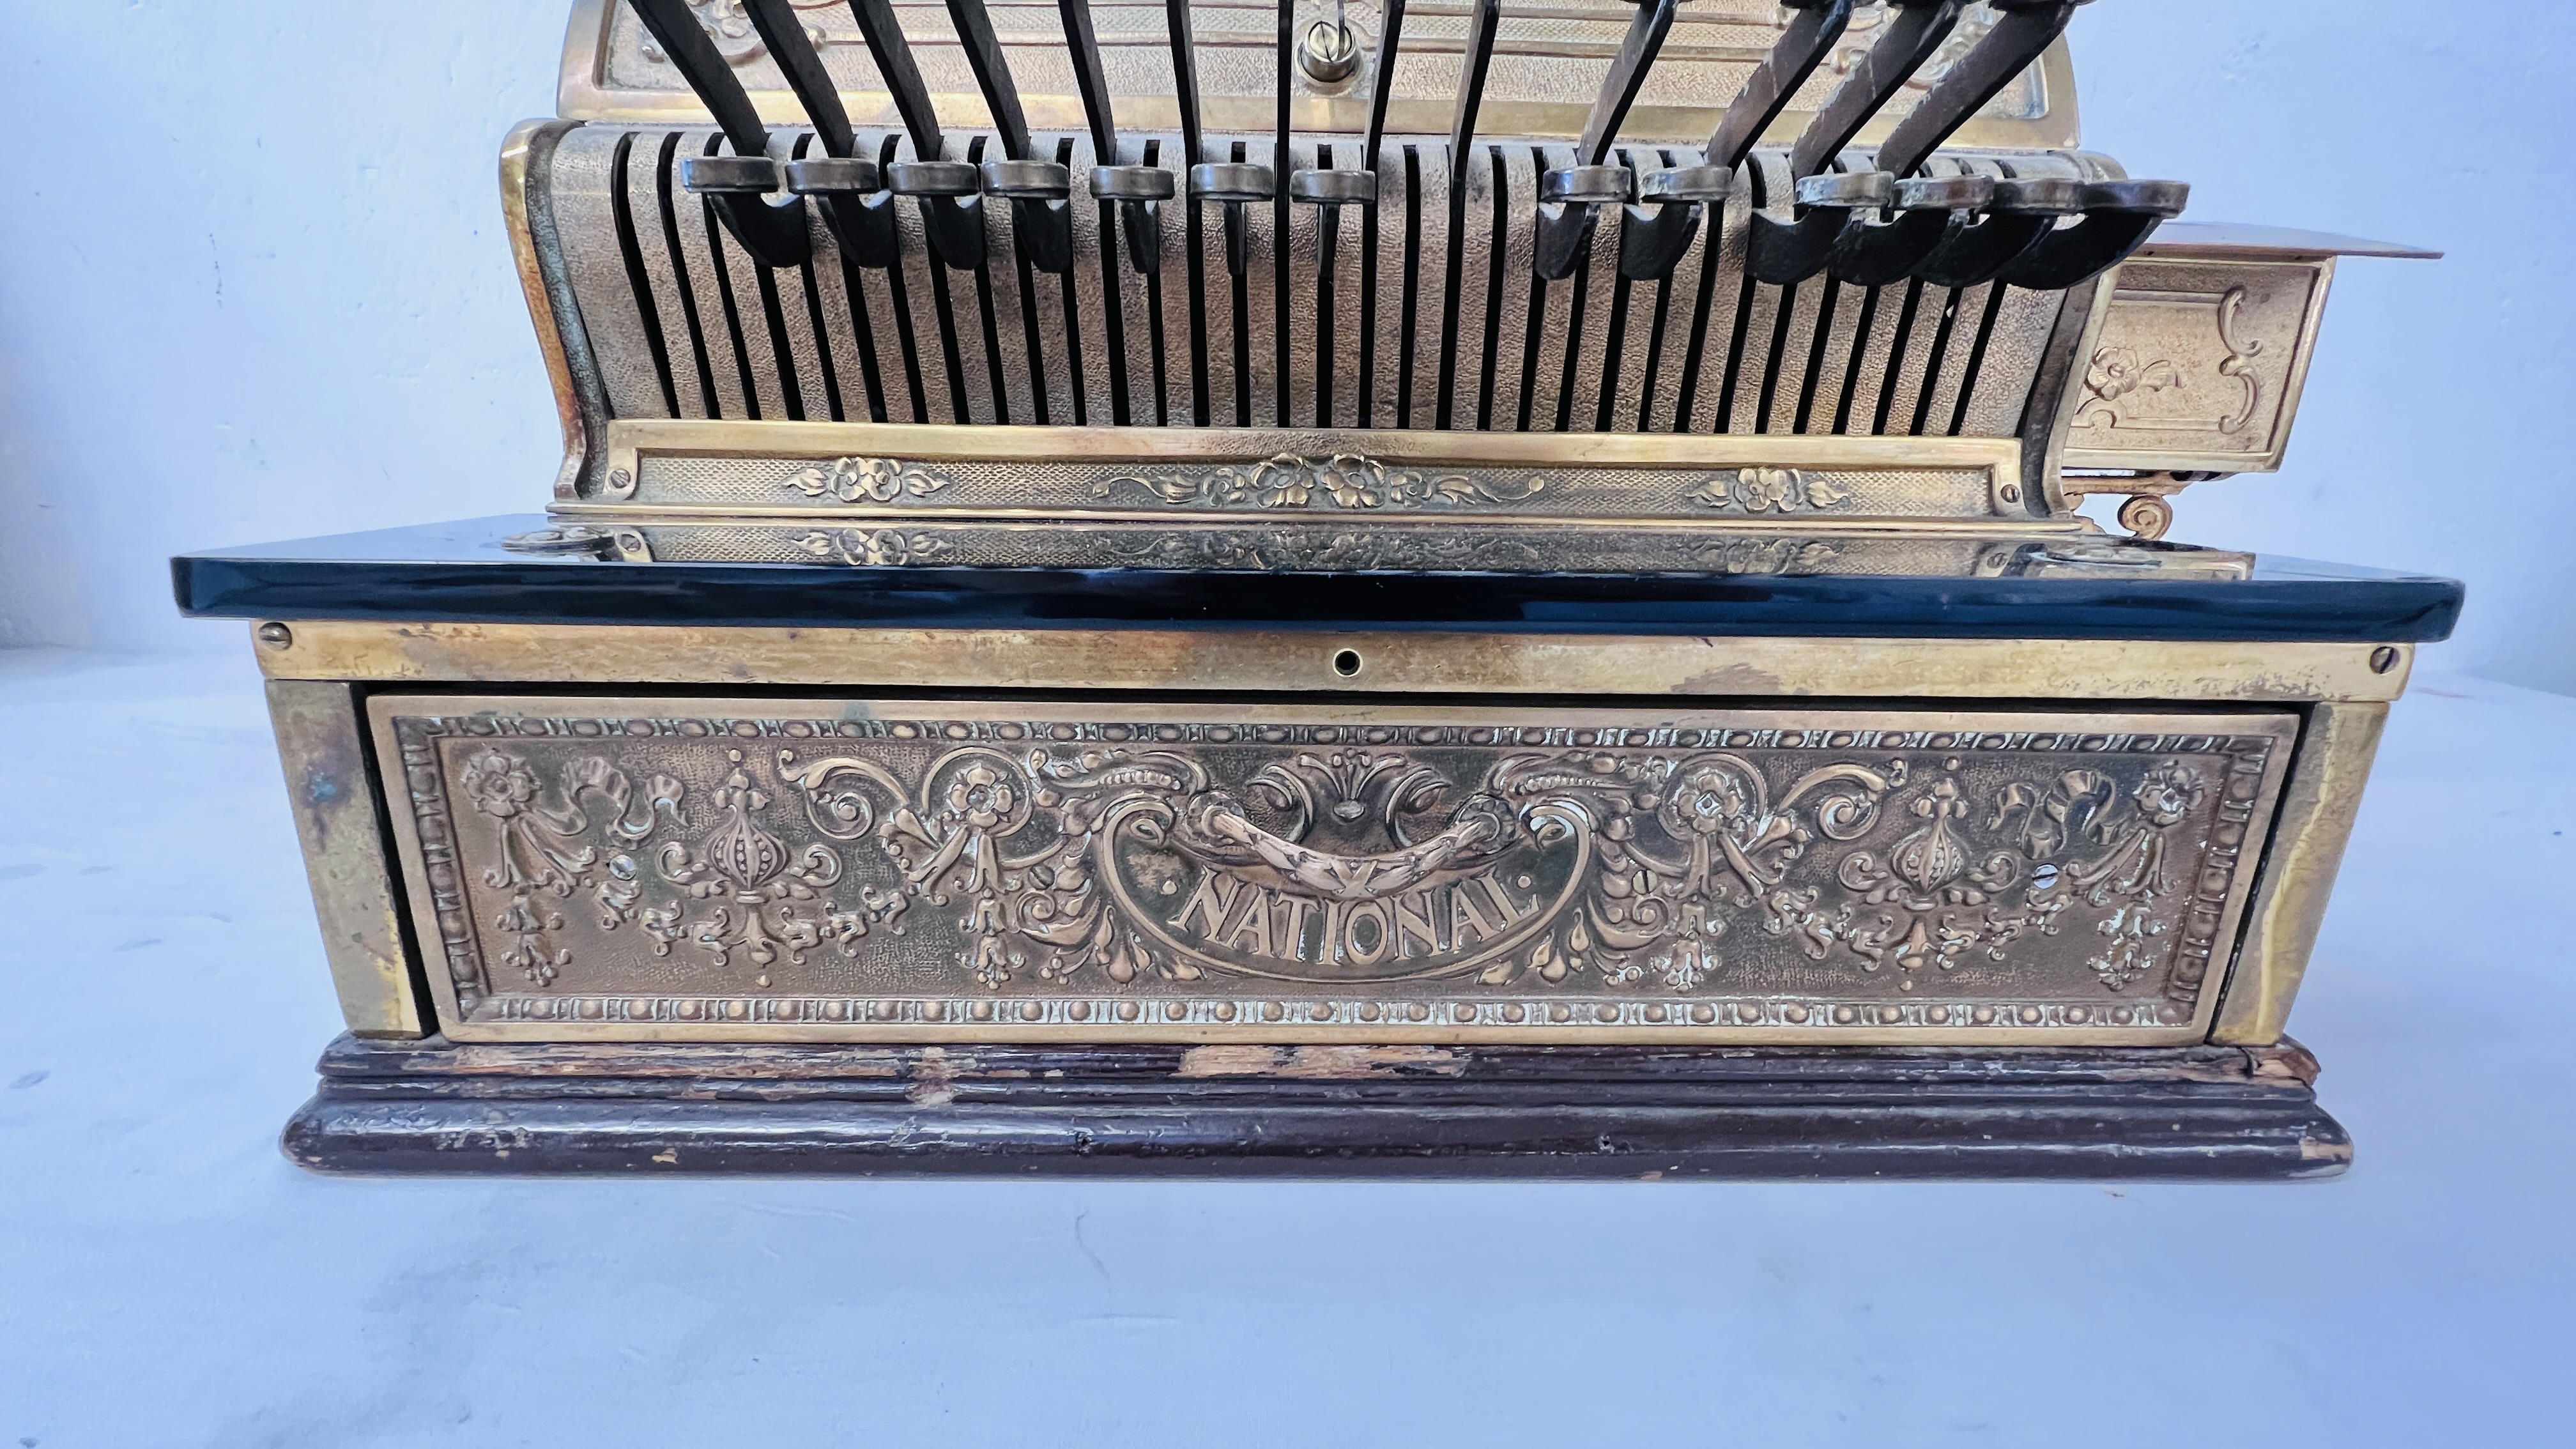 A LARGE 19TH CENTURY NATIONAL CASH REGISTER BRASS TILL - WIDTH 55CM BEARING PLAQUE S4504131358-G. - Image 7 of 24